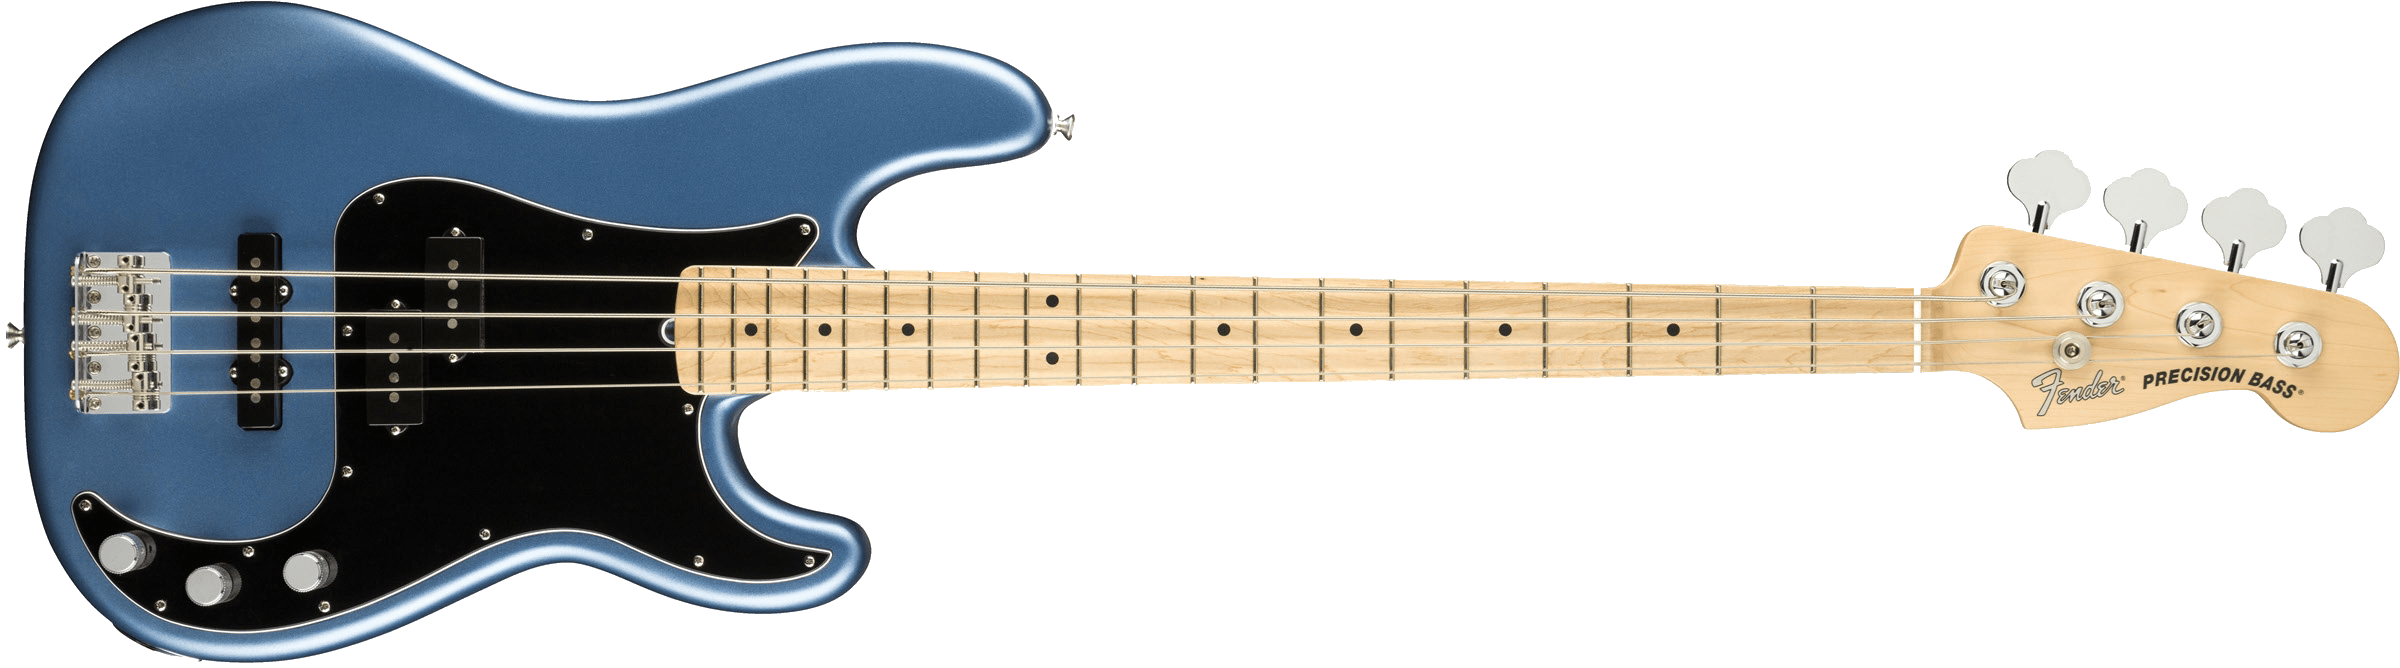 A Blue Electric Guitar With Wood Strings